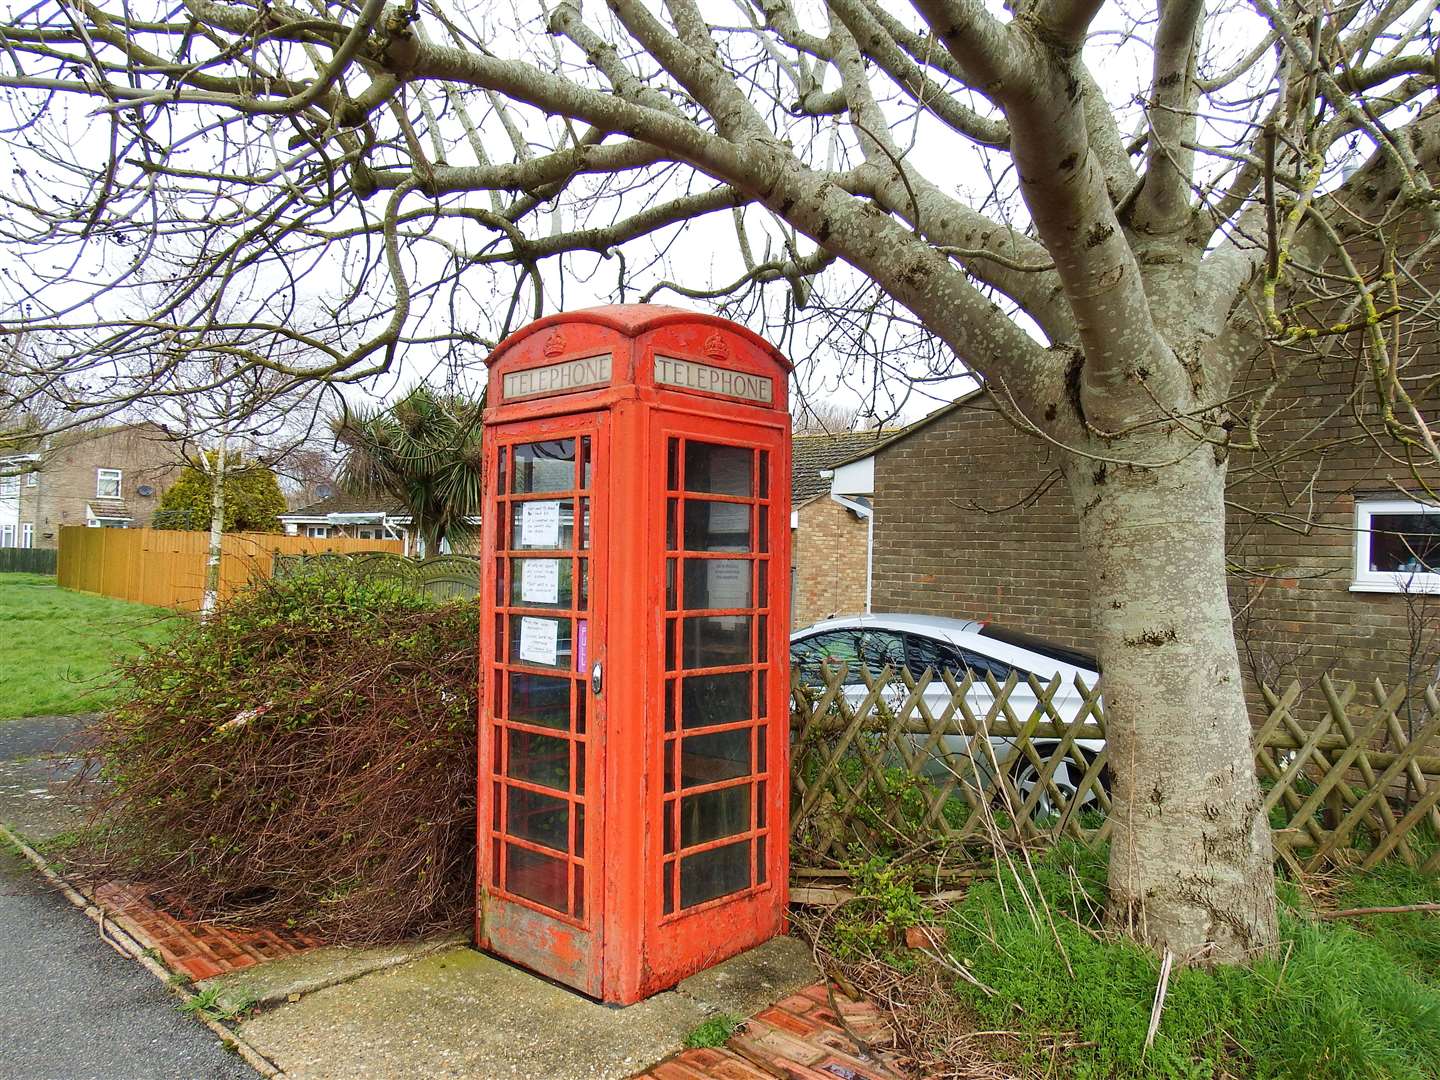 This phone box in Dymchurch could be removed. All picture: Ian McCabe